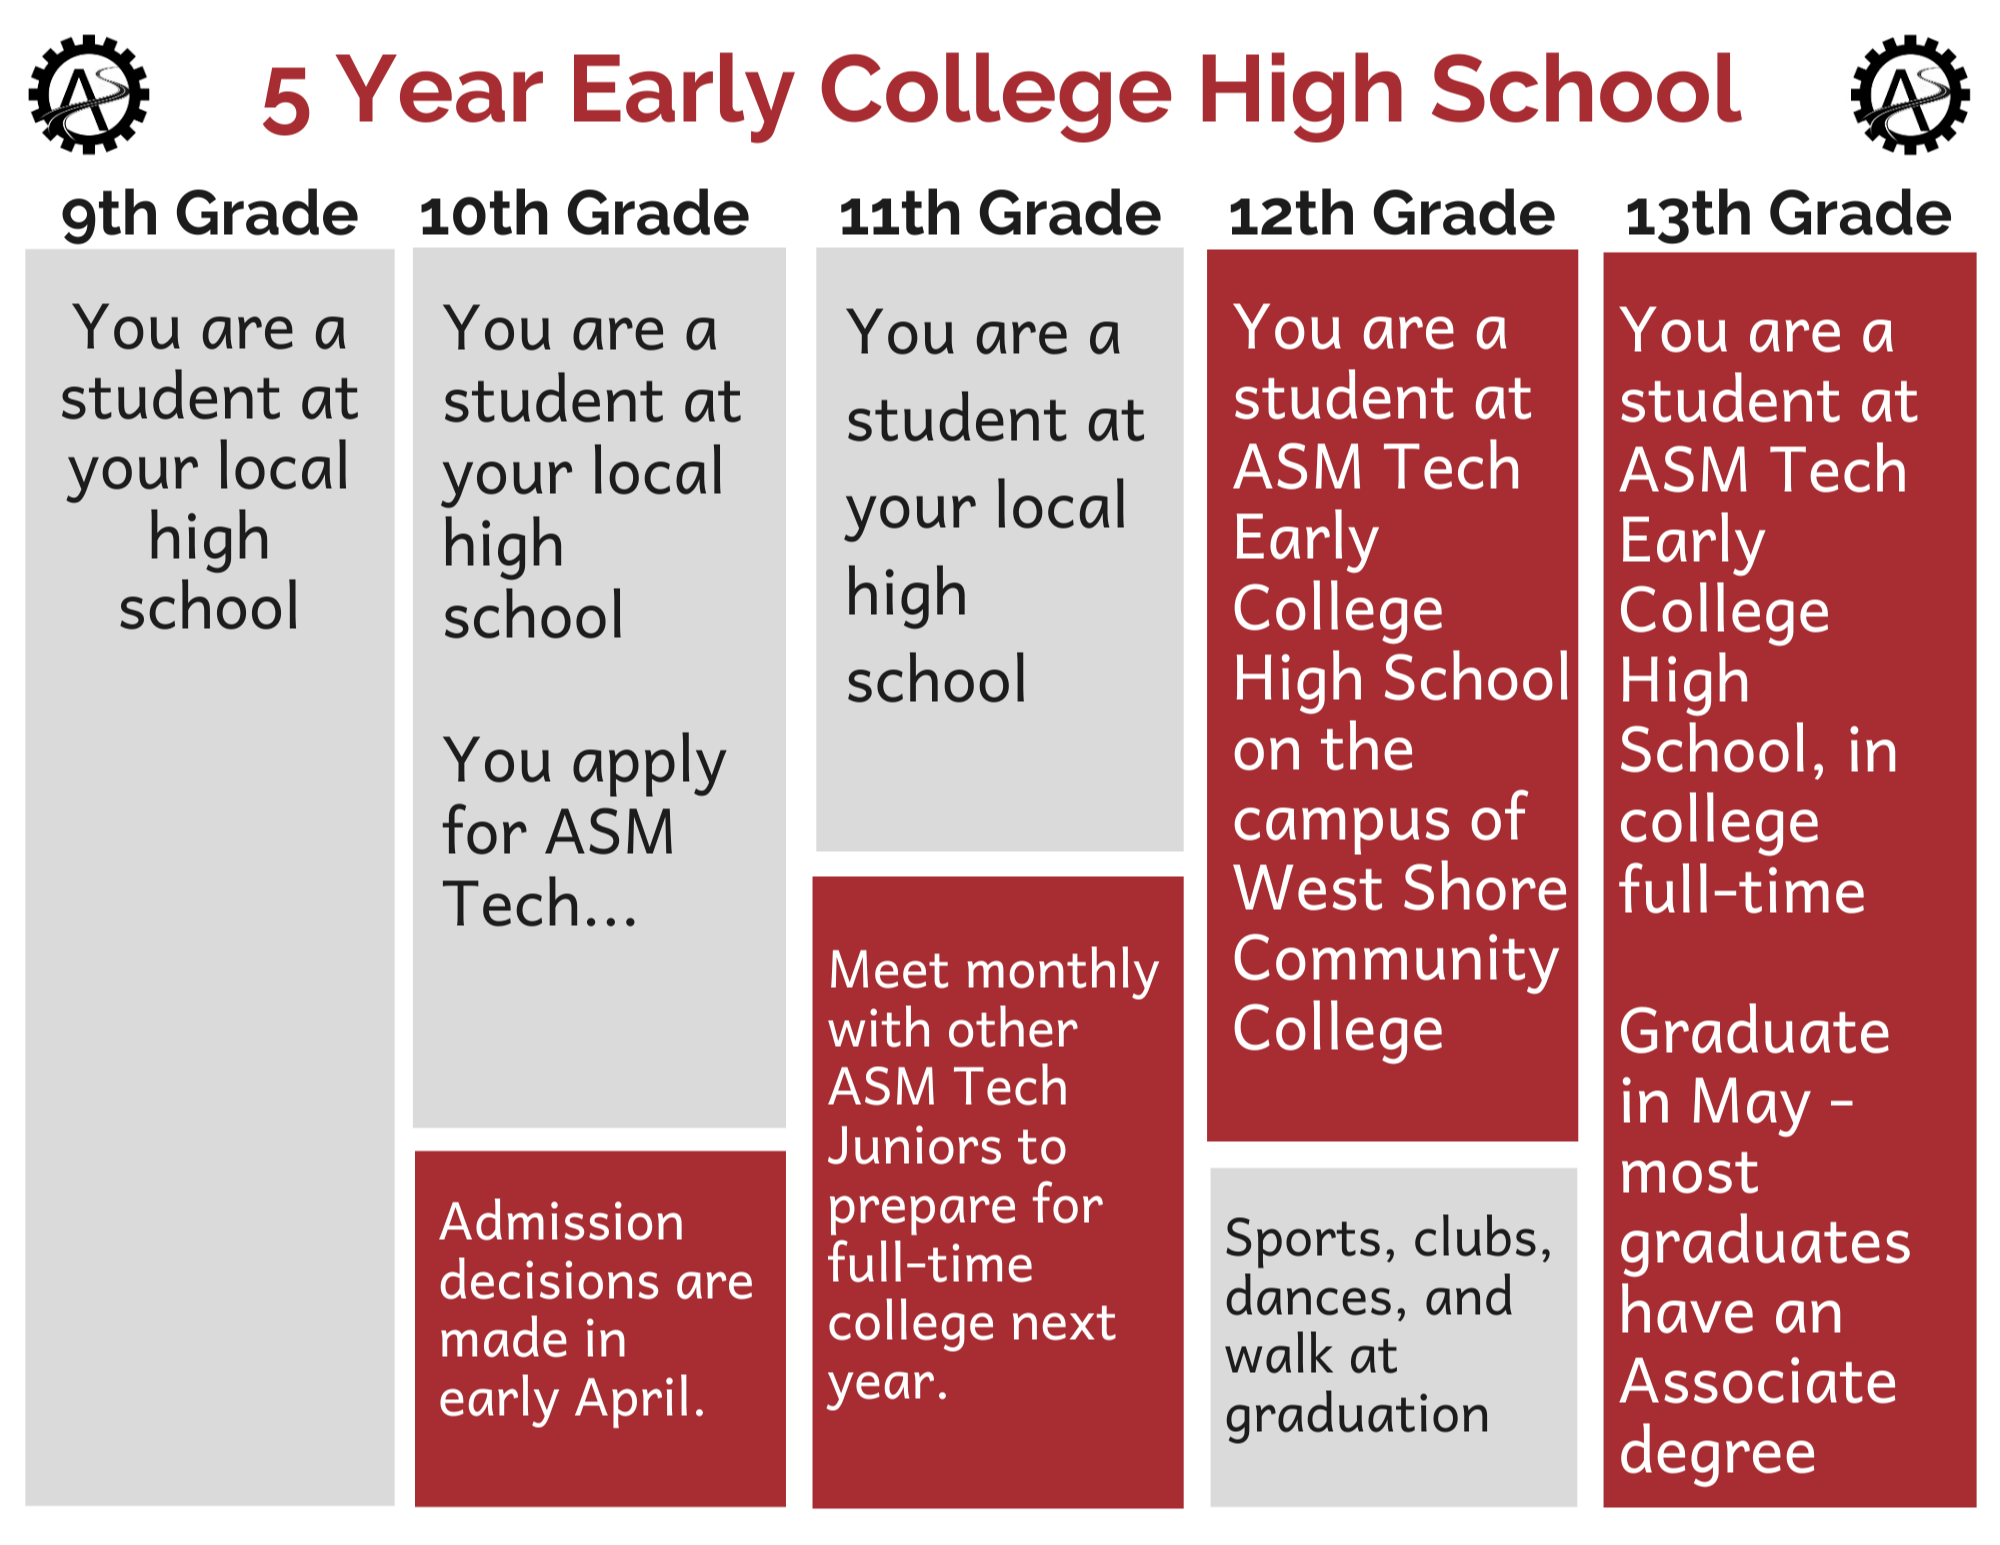 5_year_early_college_high_school_chart. 9th Grade - you are a student at your local high school. 10th grade - you are a student at your local high school. You apply for ASM Tech... Admissions decisions are made in early April. 11th grade - you are a student at your local high school. Meet monthly with otherASM Tech Juniors to prepare for full-time college next year. 12th Grade. You are a student at ASM Tech Early College HIgh School on the campus of West Shore Community College. Sports, clubs, dances, and walk at graduation. 13th Grade Youa re a student at ASM Tech Early College High School, in college full-time. Graduate in May - most graduates have an  Associate degree